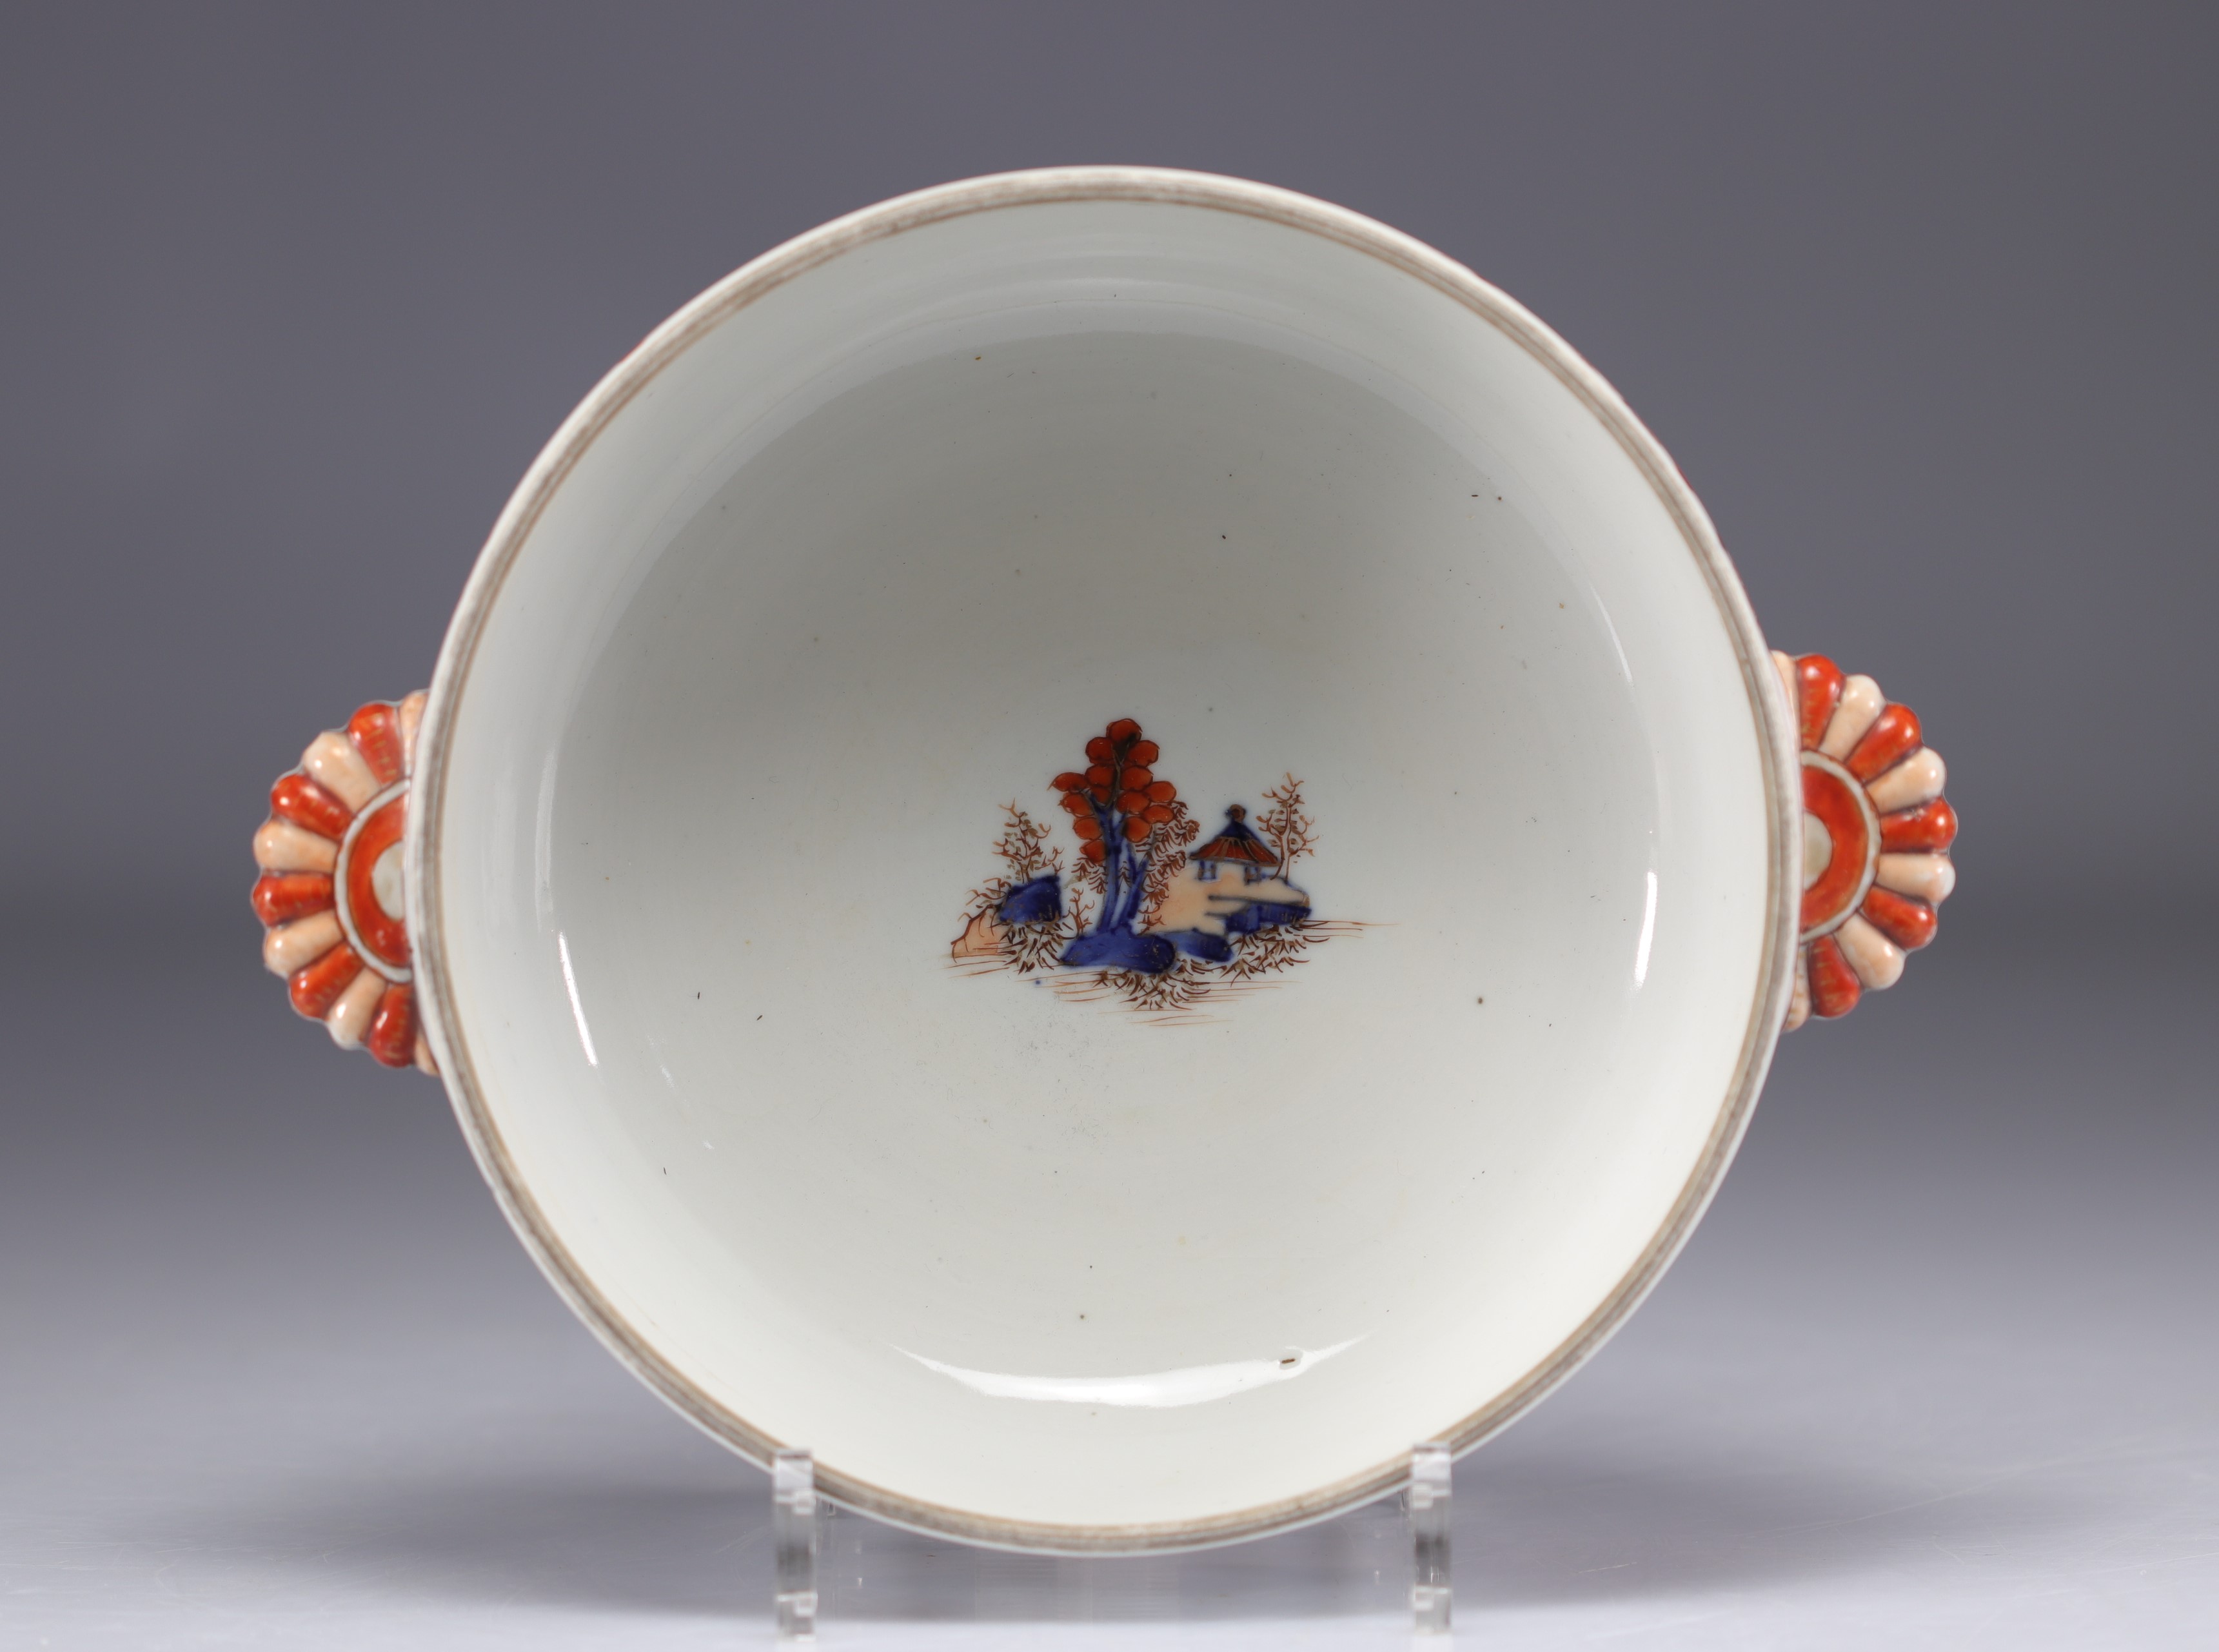 Covered dish in chinese porcelain decorated with landscapes on a white background from 18th century - Image 4 of 6